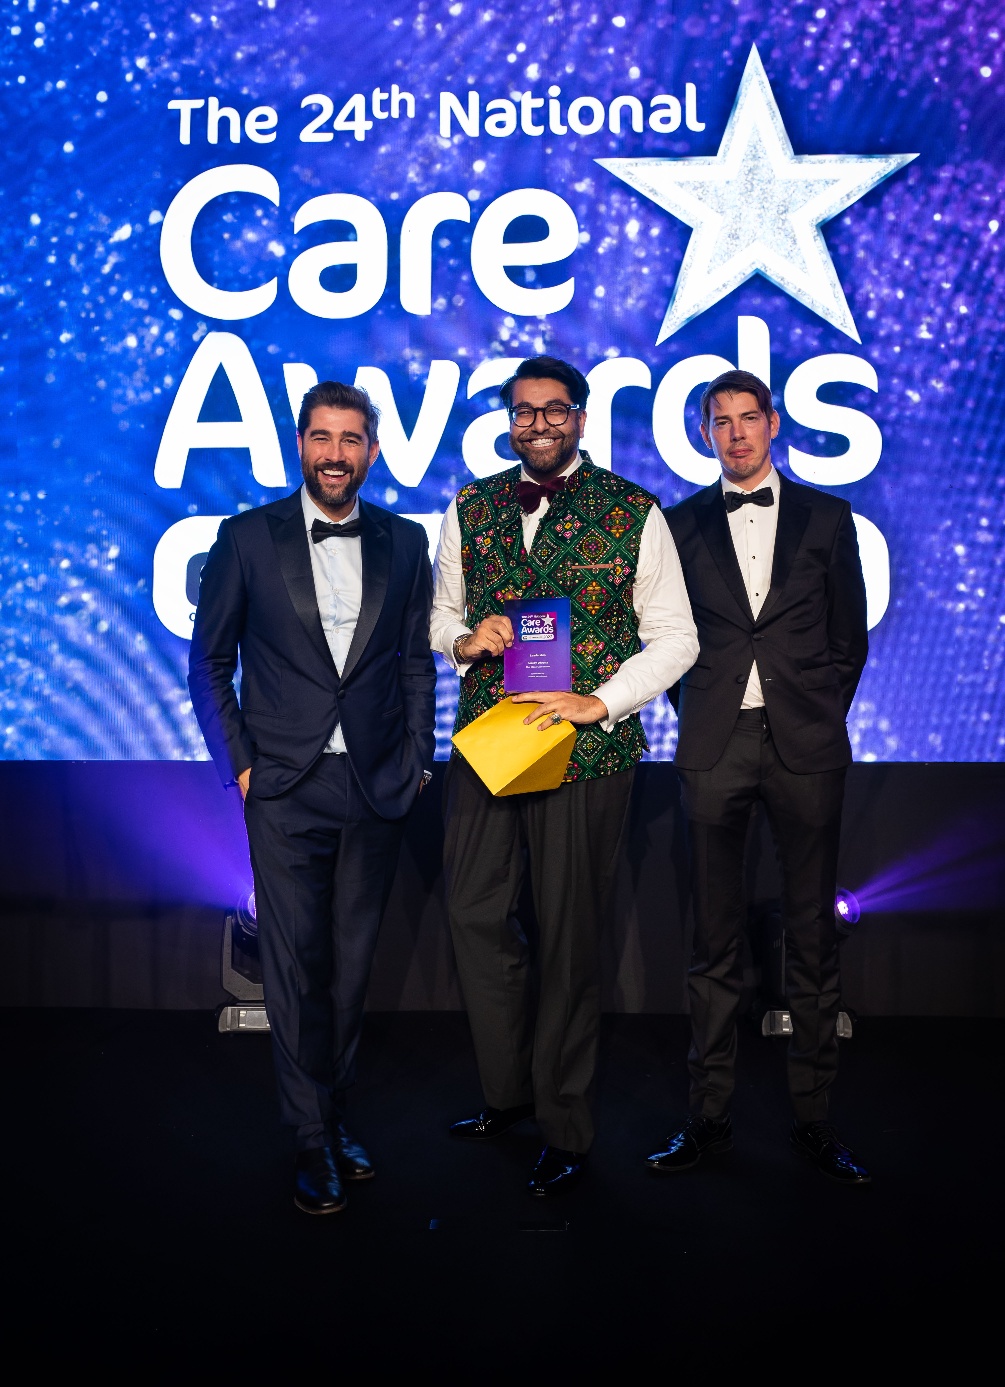 Winner at the national care awards for leadership